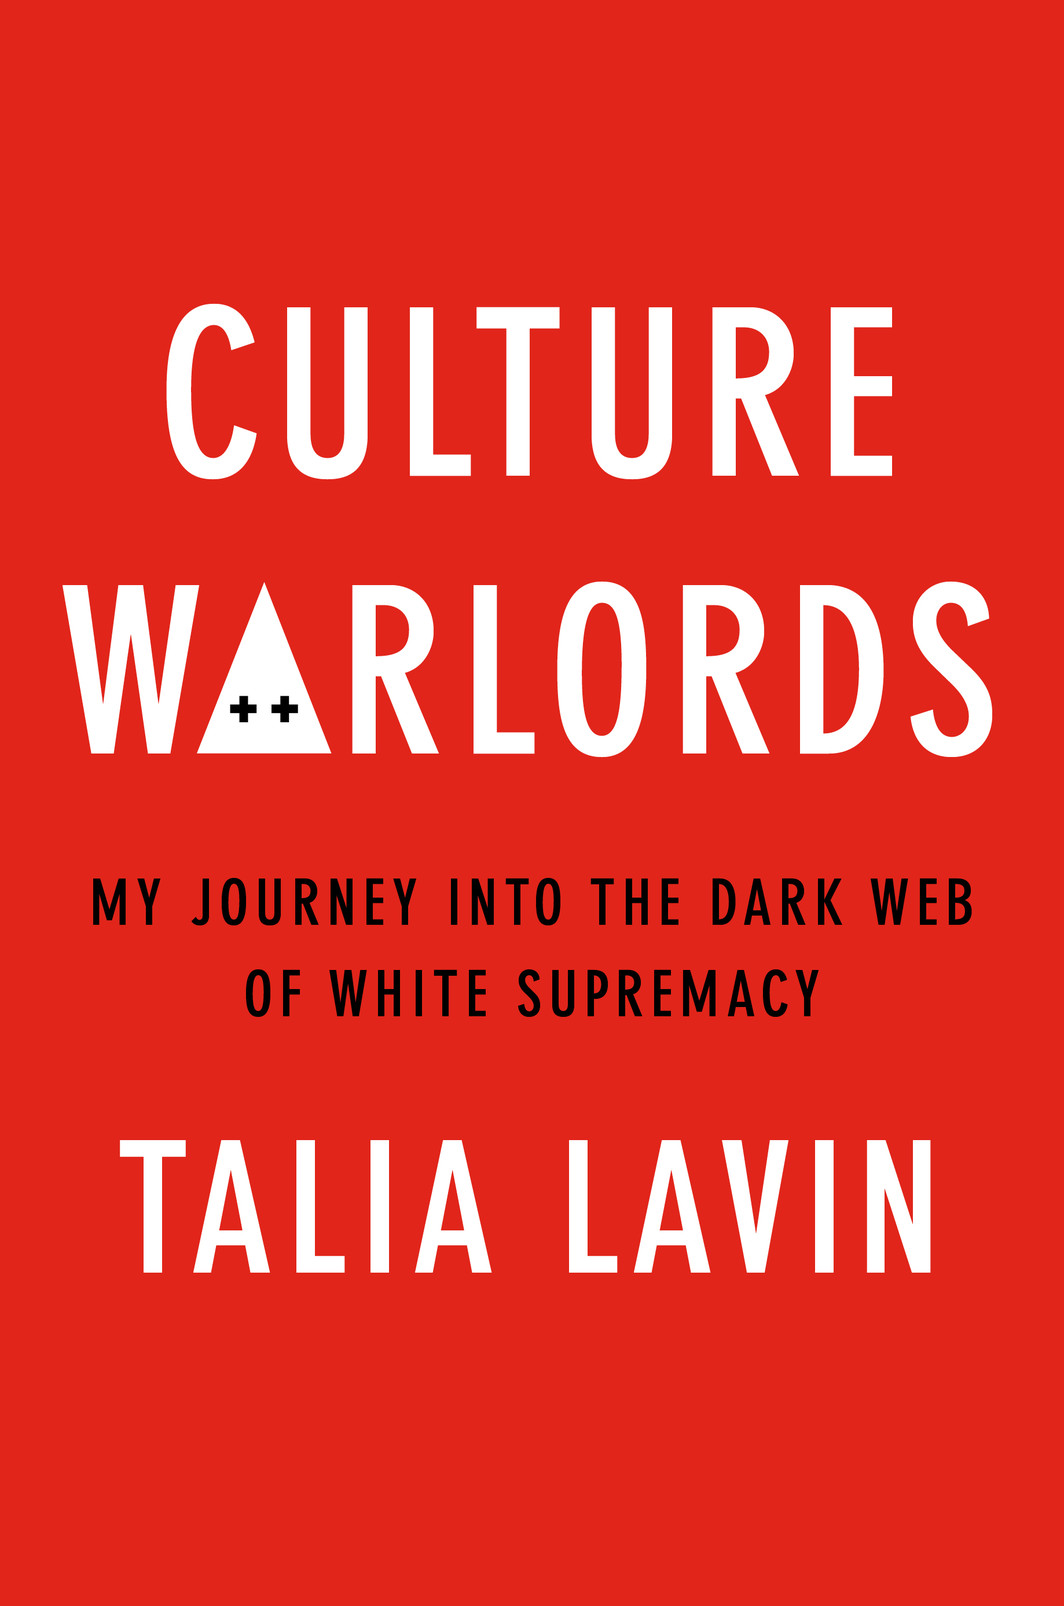 The cover of Culture Warlords: My Journey Into the Dark Web of White Supremacy